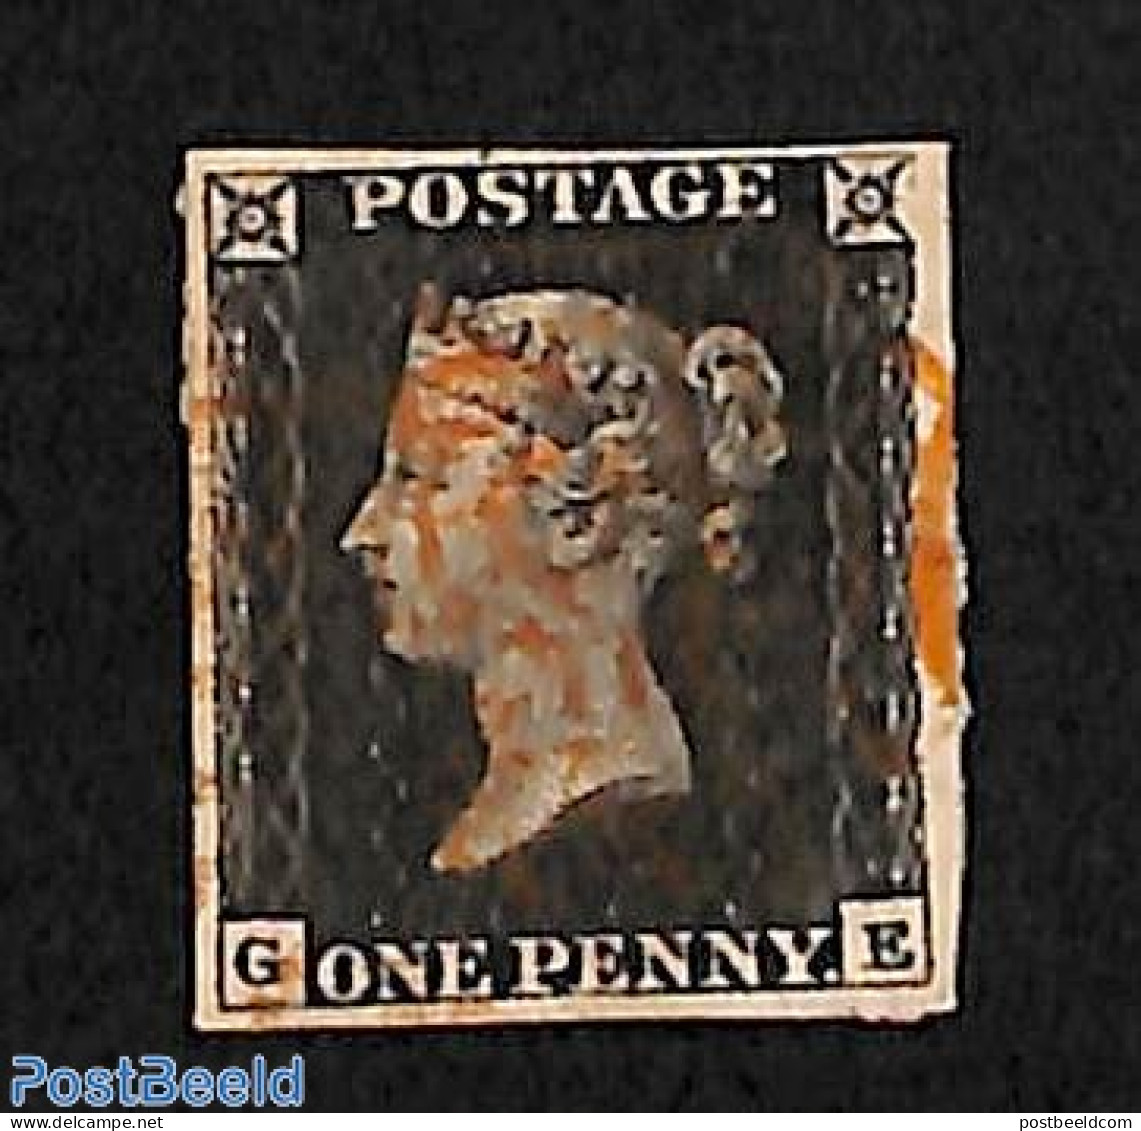 Great Britain 1840 Penny Black, Used, Used Or CTO - Used Stamps